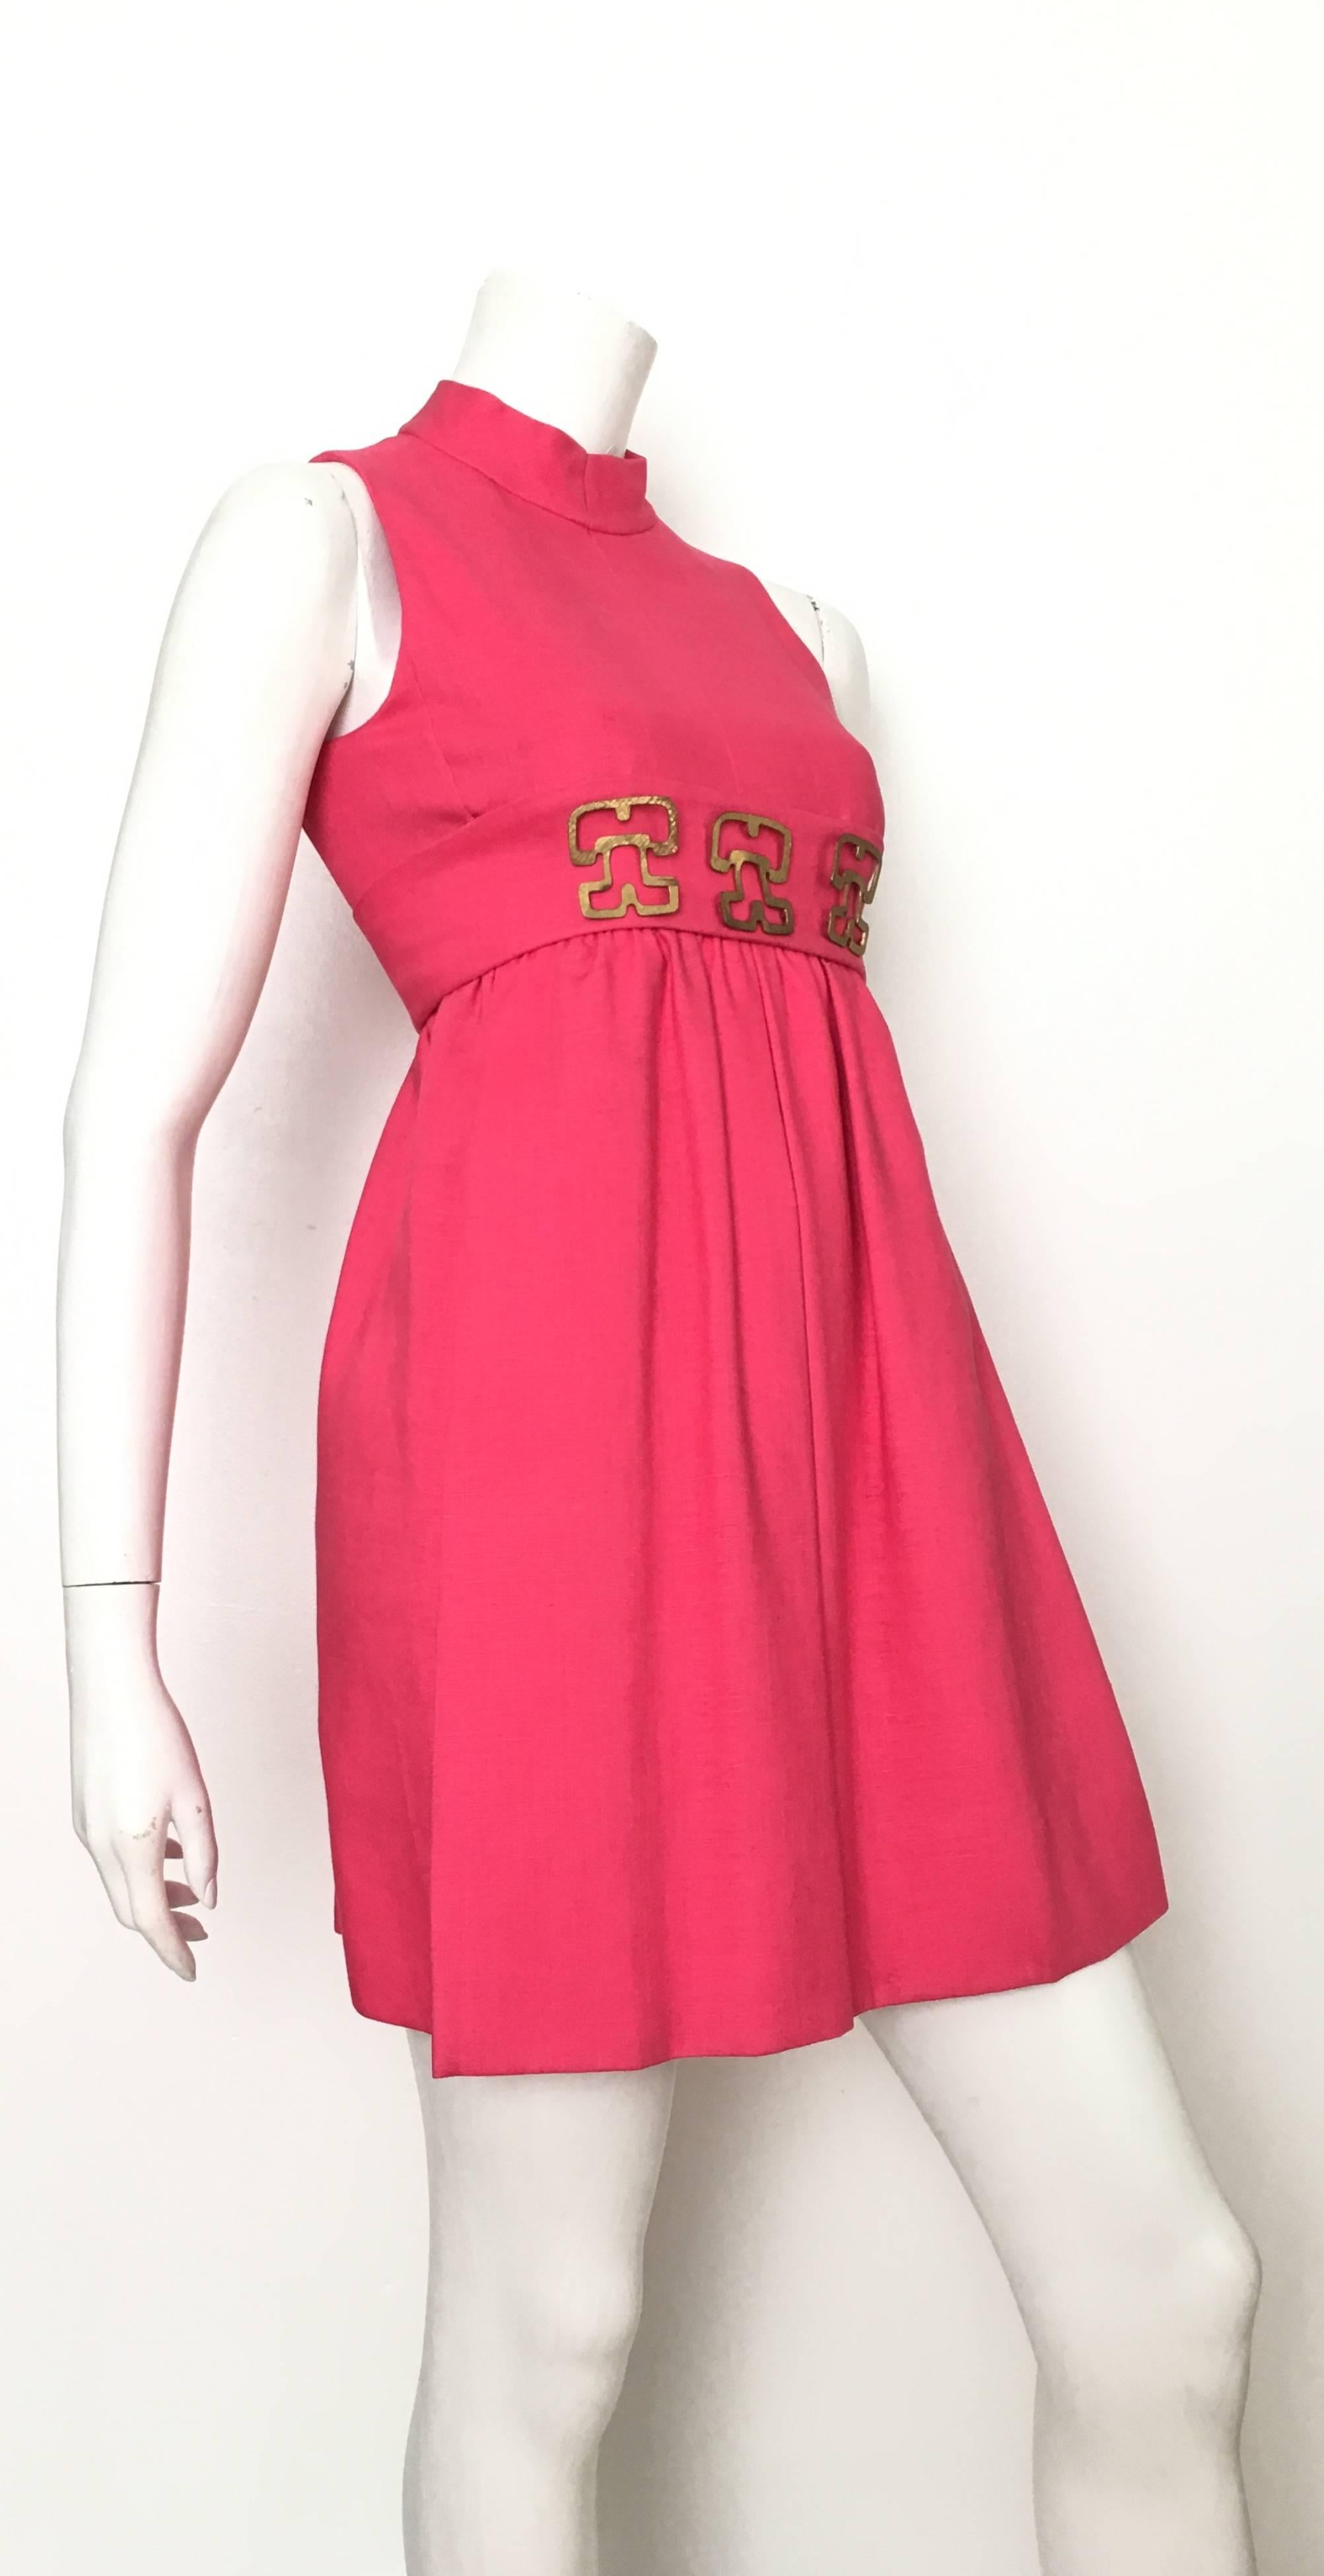 Donald Brooks 1970s pink linen sleeveless cocktail dress is a size 4.  Ladies please grab your tape measure so you can properly measure your bust, waist & hips to make certain this vintage treasure will fit your lovely body.  Three abstract metal